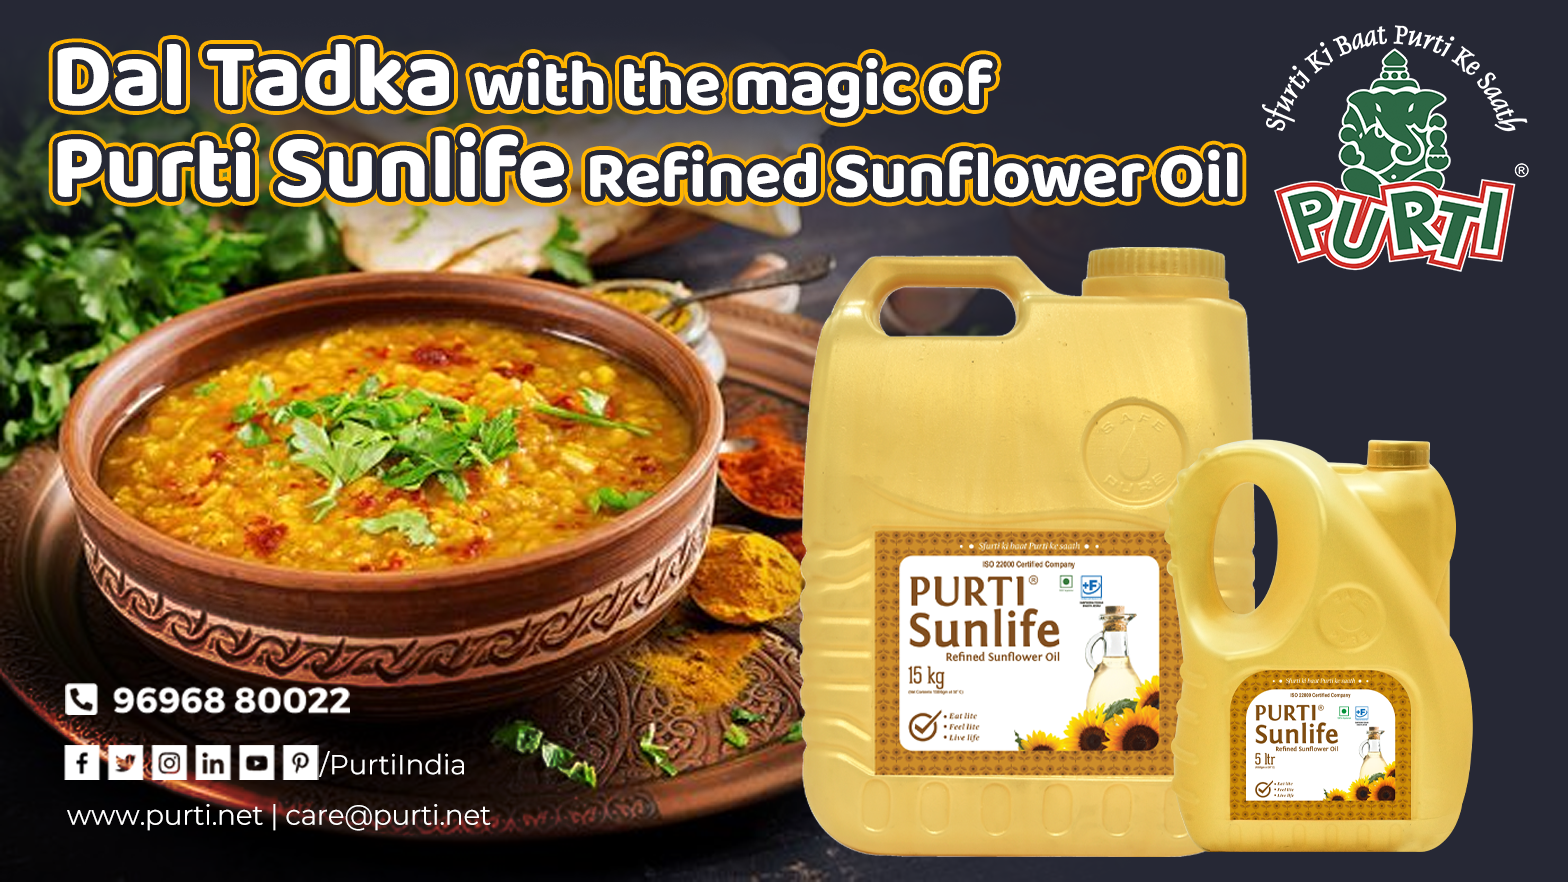 Elevate your dal tadka taste with the magic of Purti Sunlife Refined Sunflower Oil